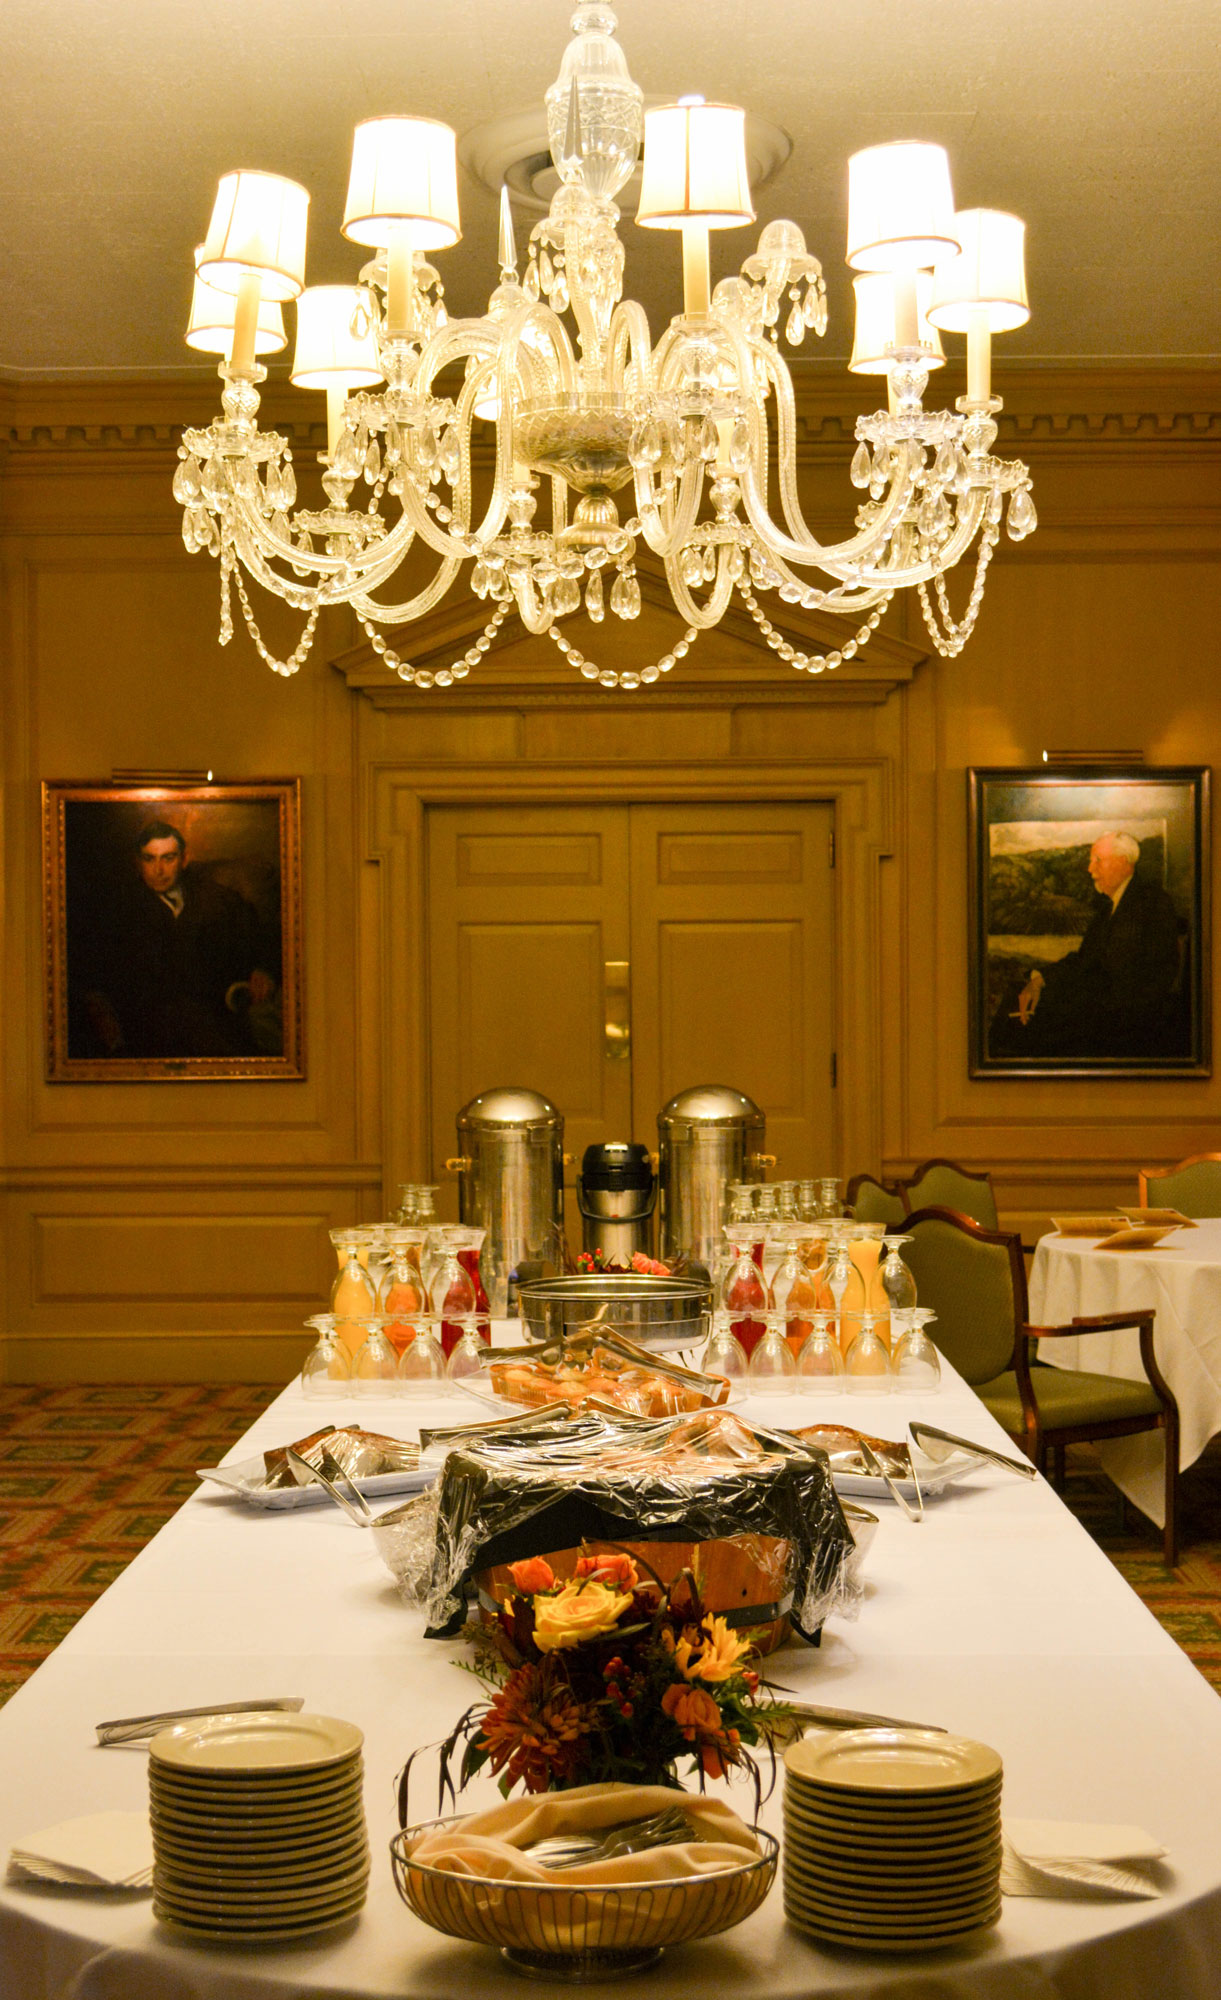 Brunch beautifully presented on the table in the Indiana Memorial Union’s ornate Federal Room.